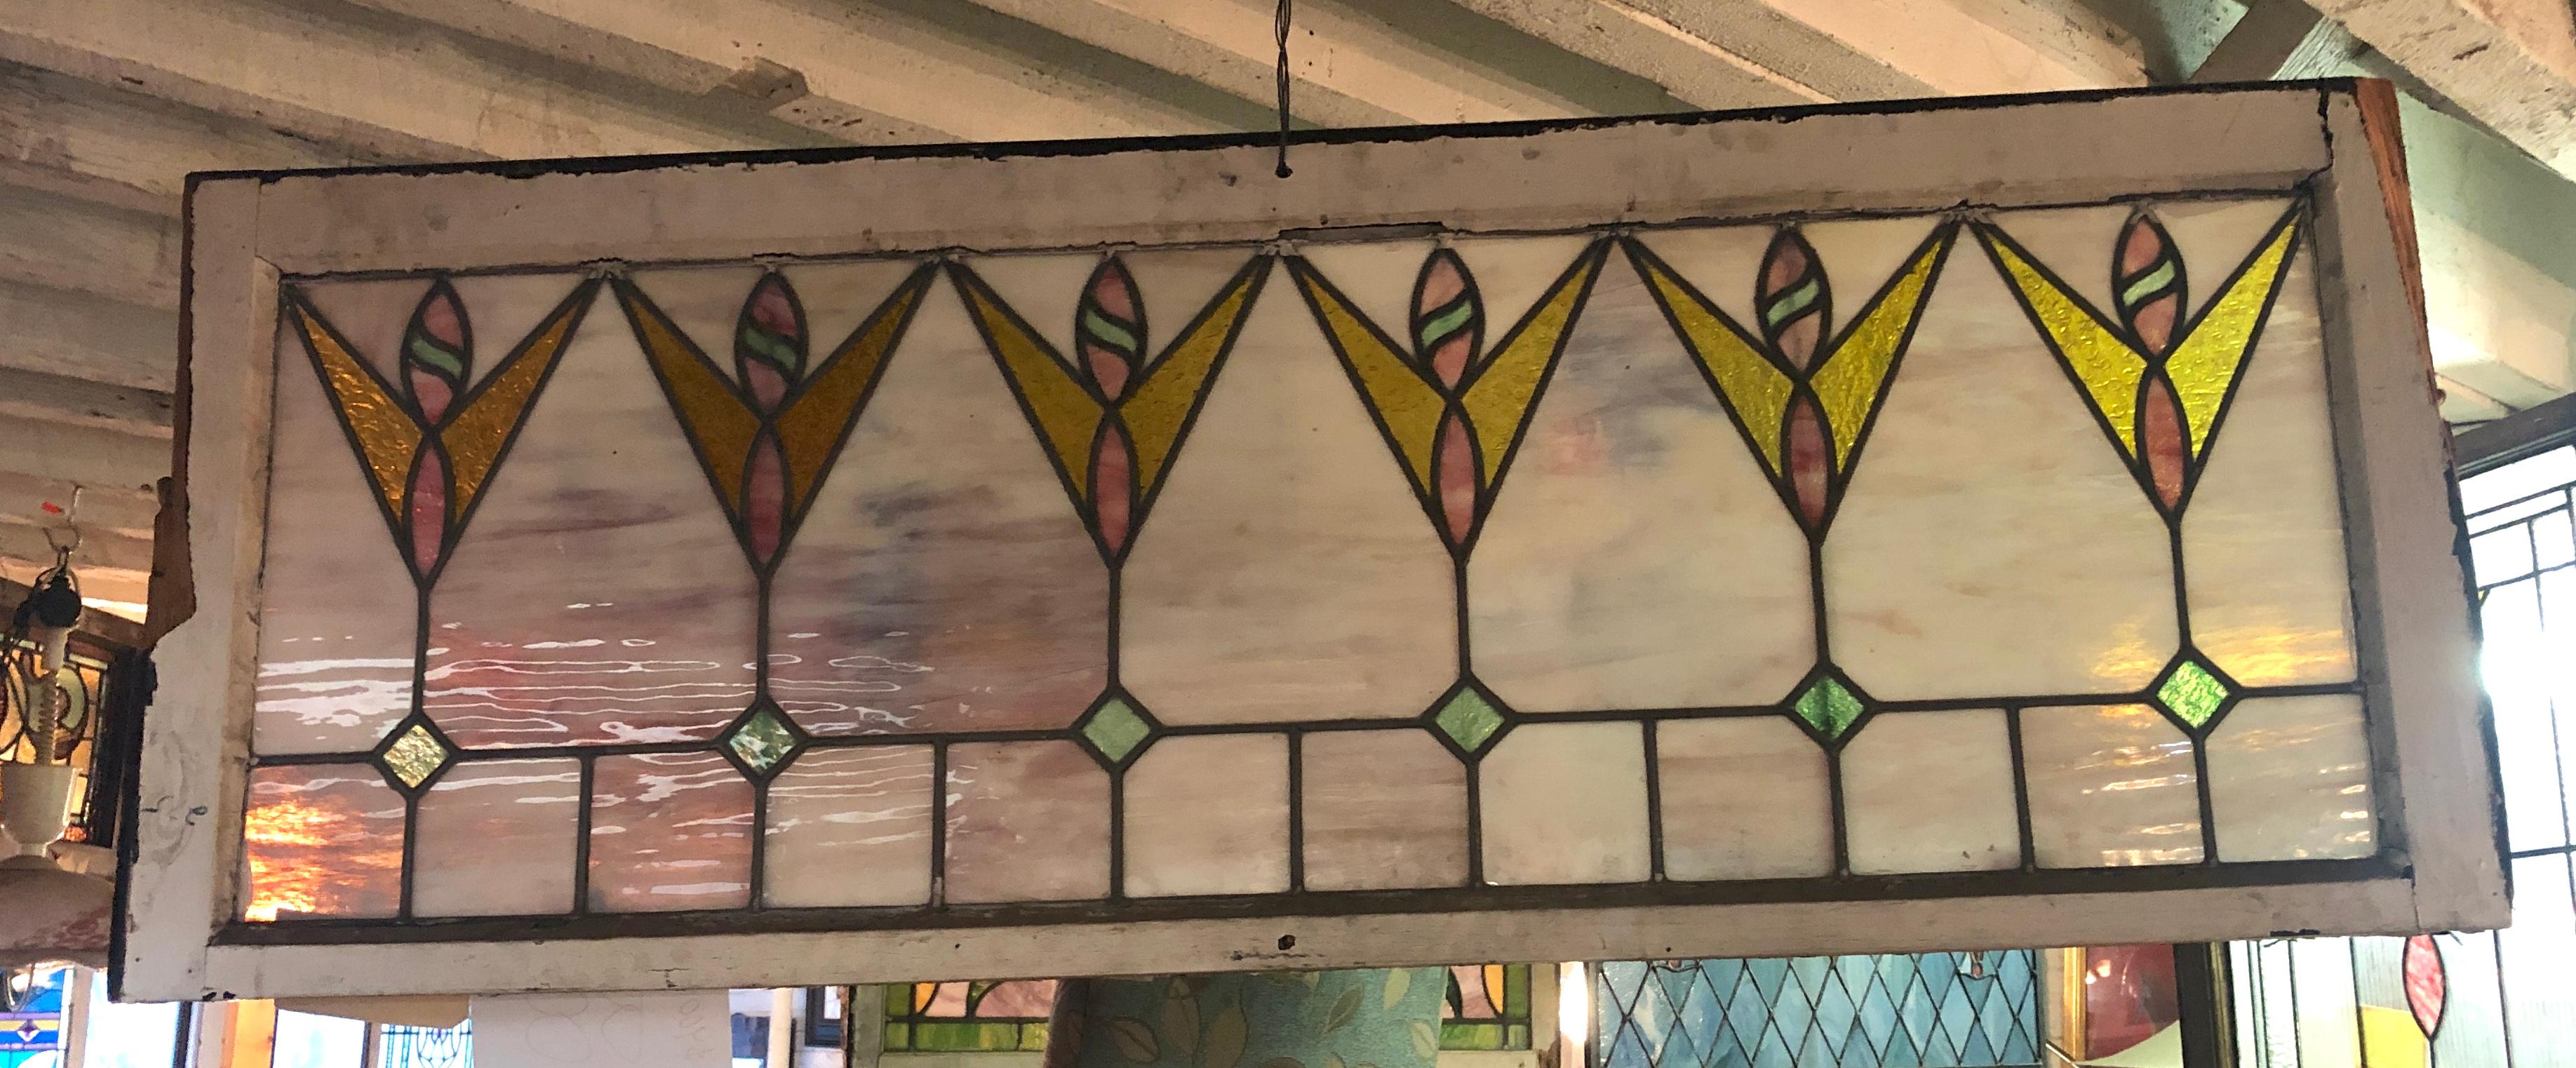 Stained glass transom window from the turn of the century. Beautiful leaded design with colored glass.
Currently housed in a temporary wooden frame - the overall dimensions are for the stained glass and the frame.
Located in NY